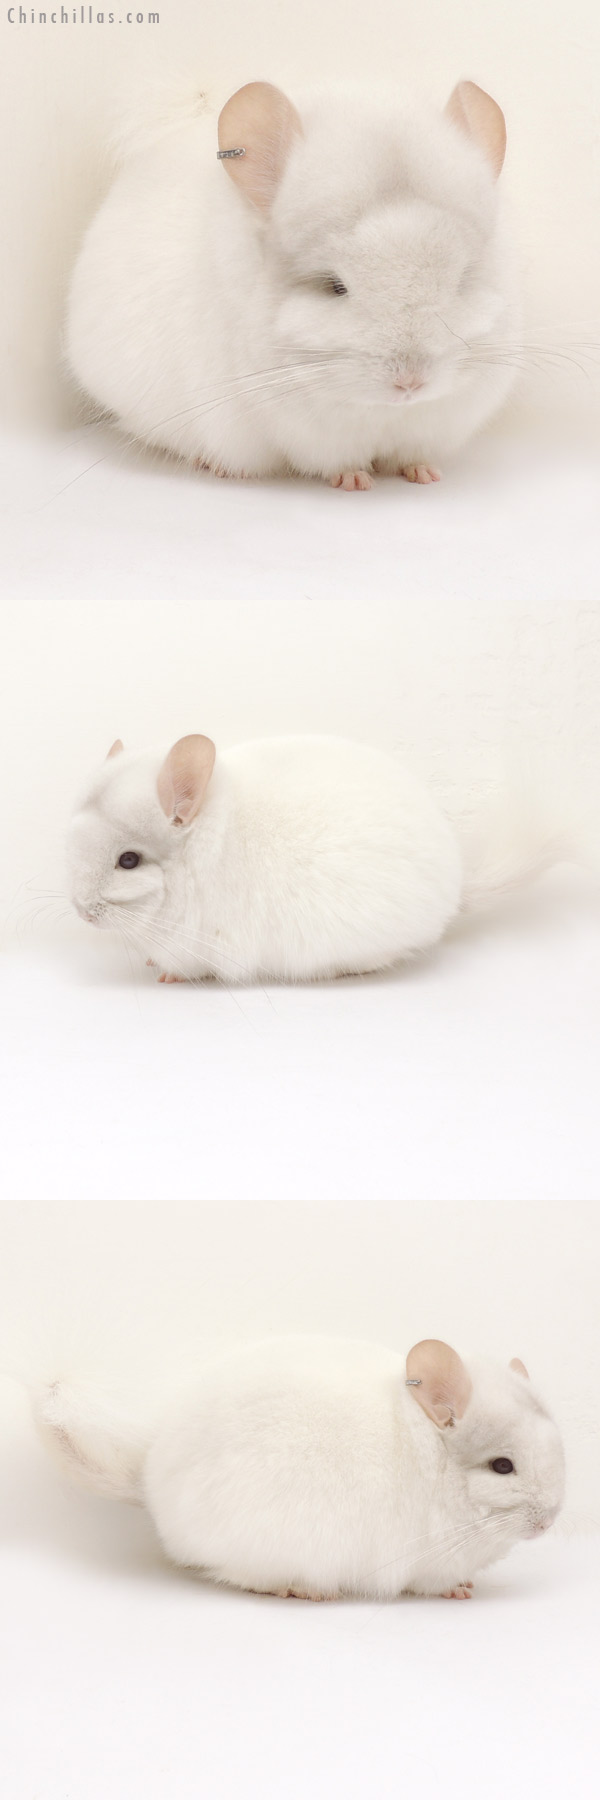 Chinchilla or related item offered for sale or export on Chinchillas.com - 14084 Exceptional Pink White  Royal Persian Angora Male Chinchilla